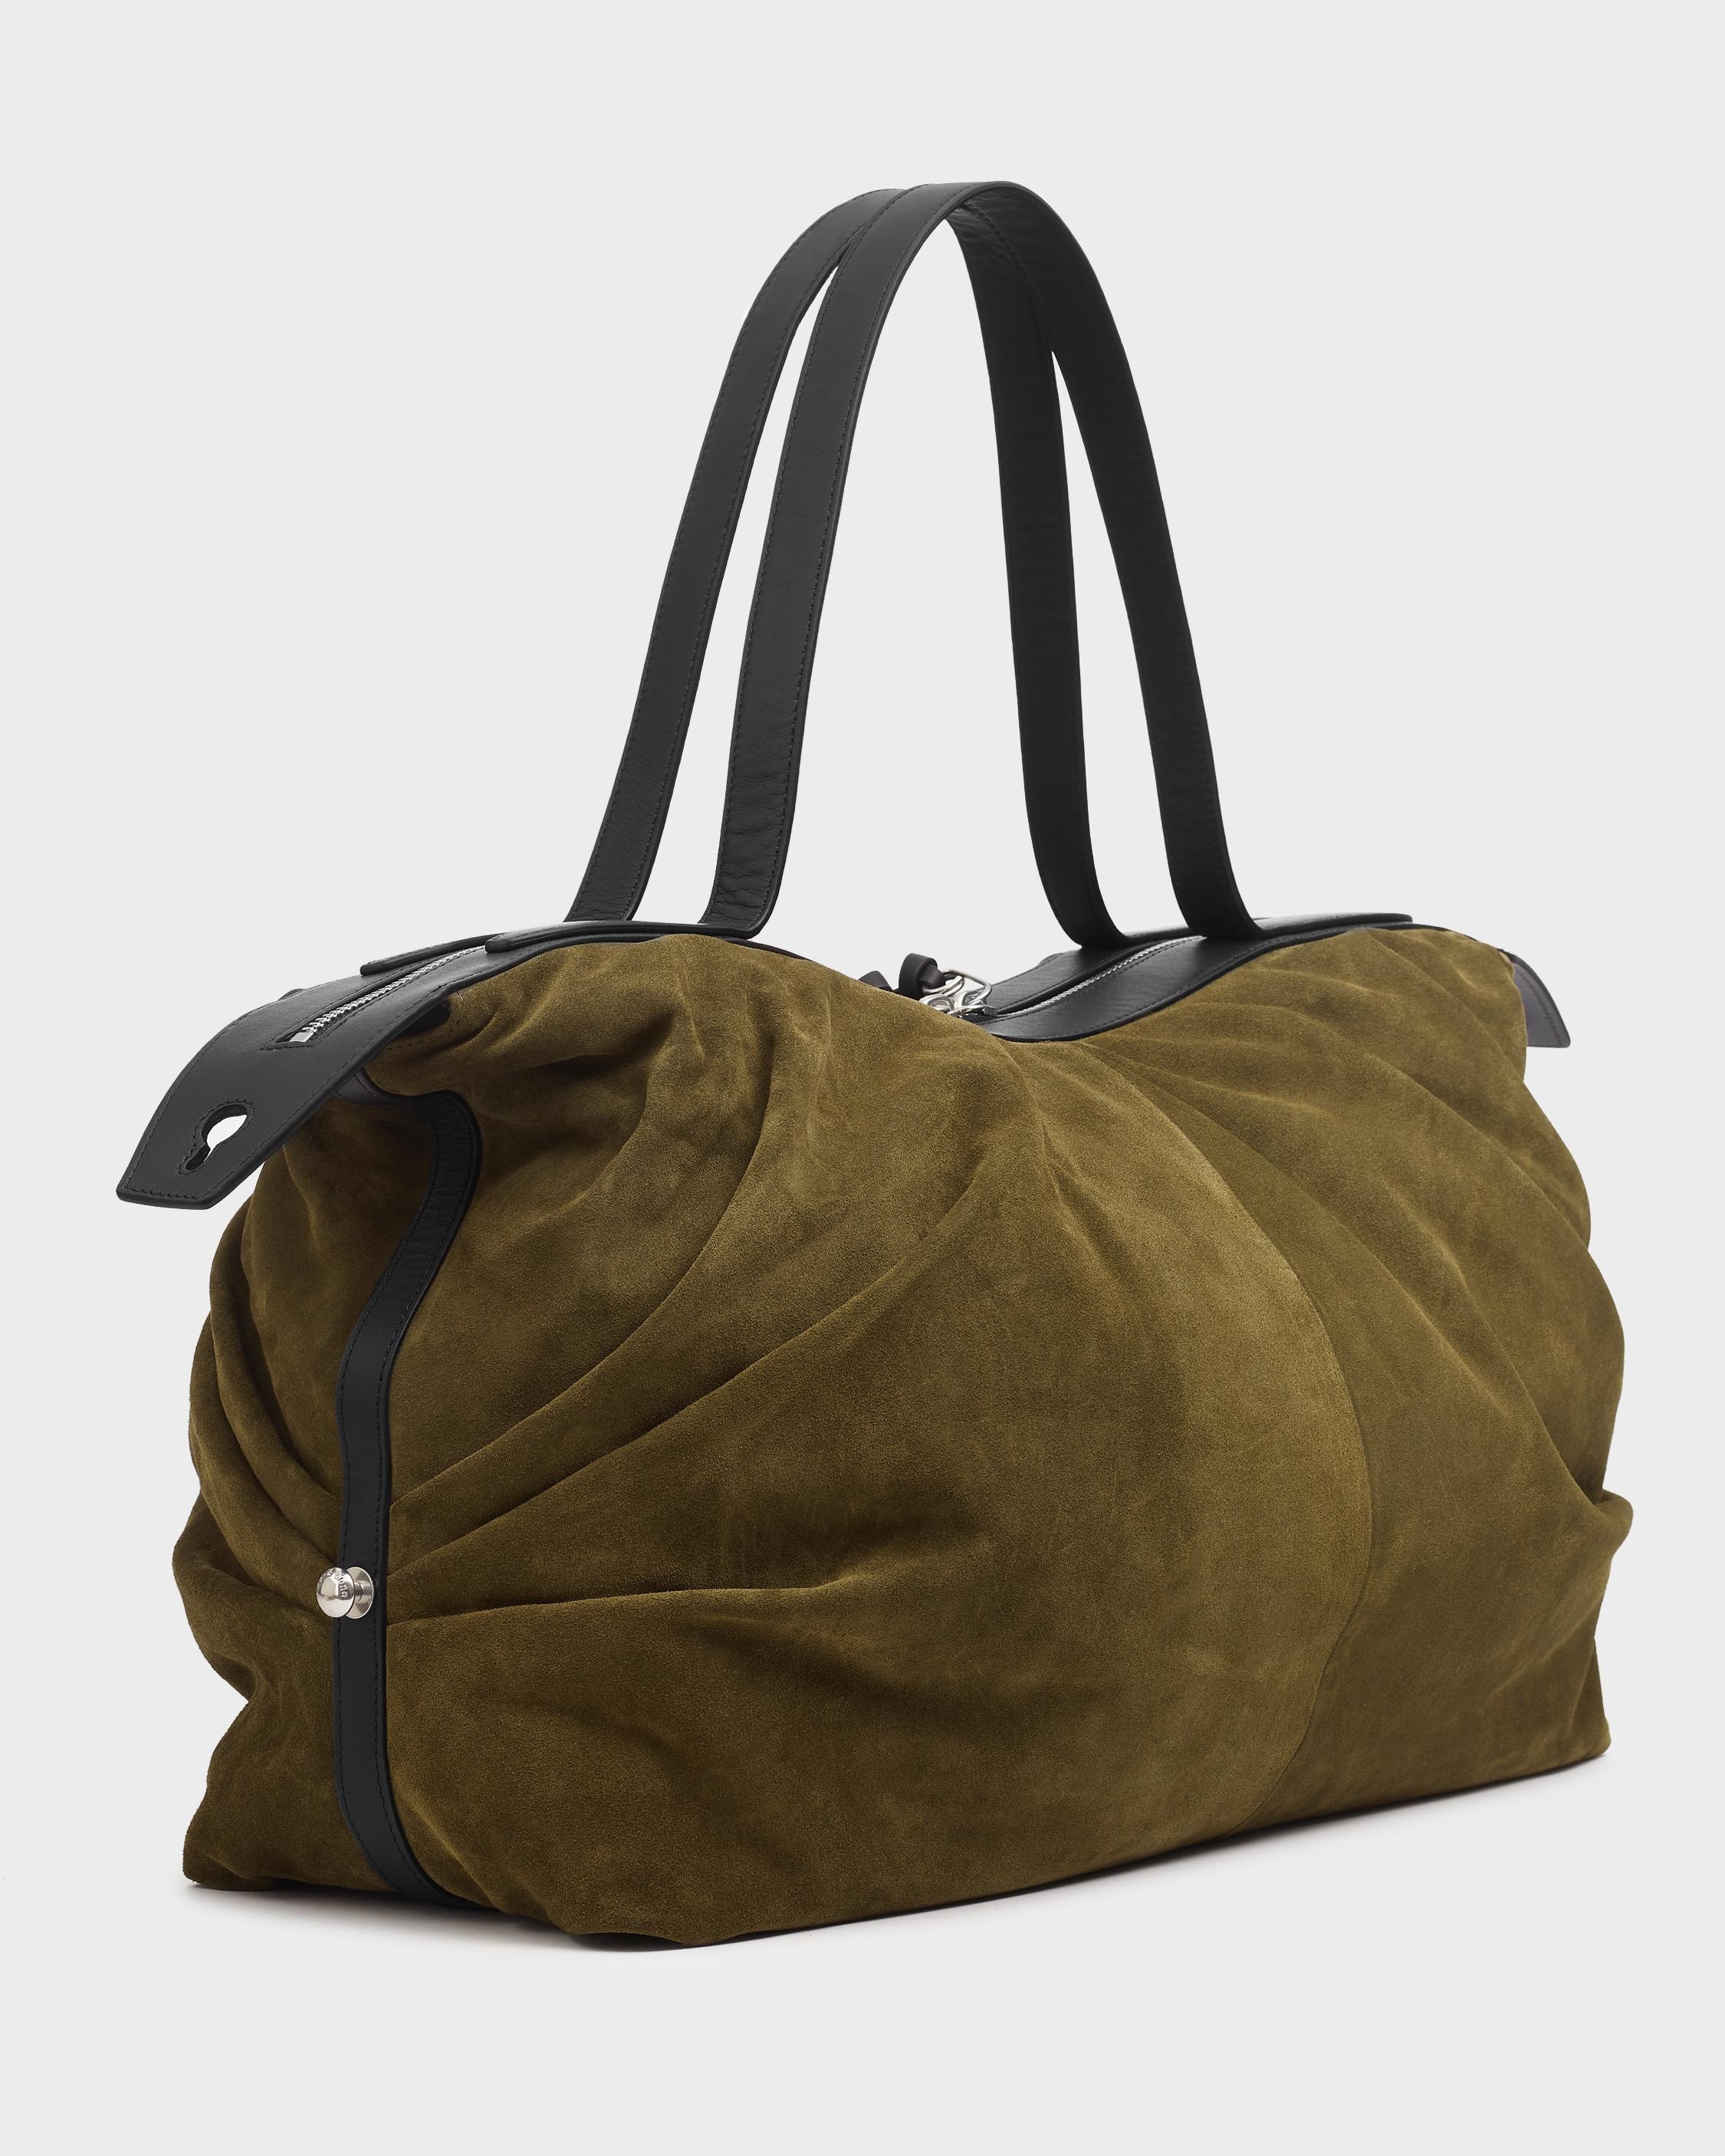 Commuter Overnighter - Suede
Large Duffle Bag - 4